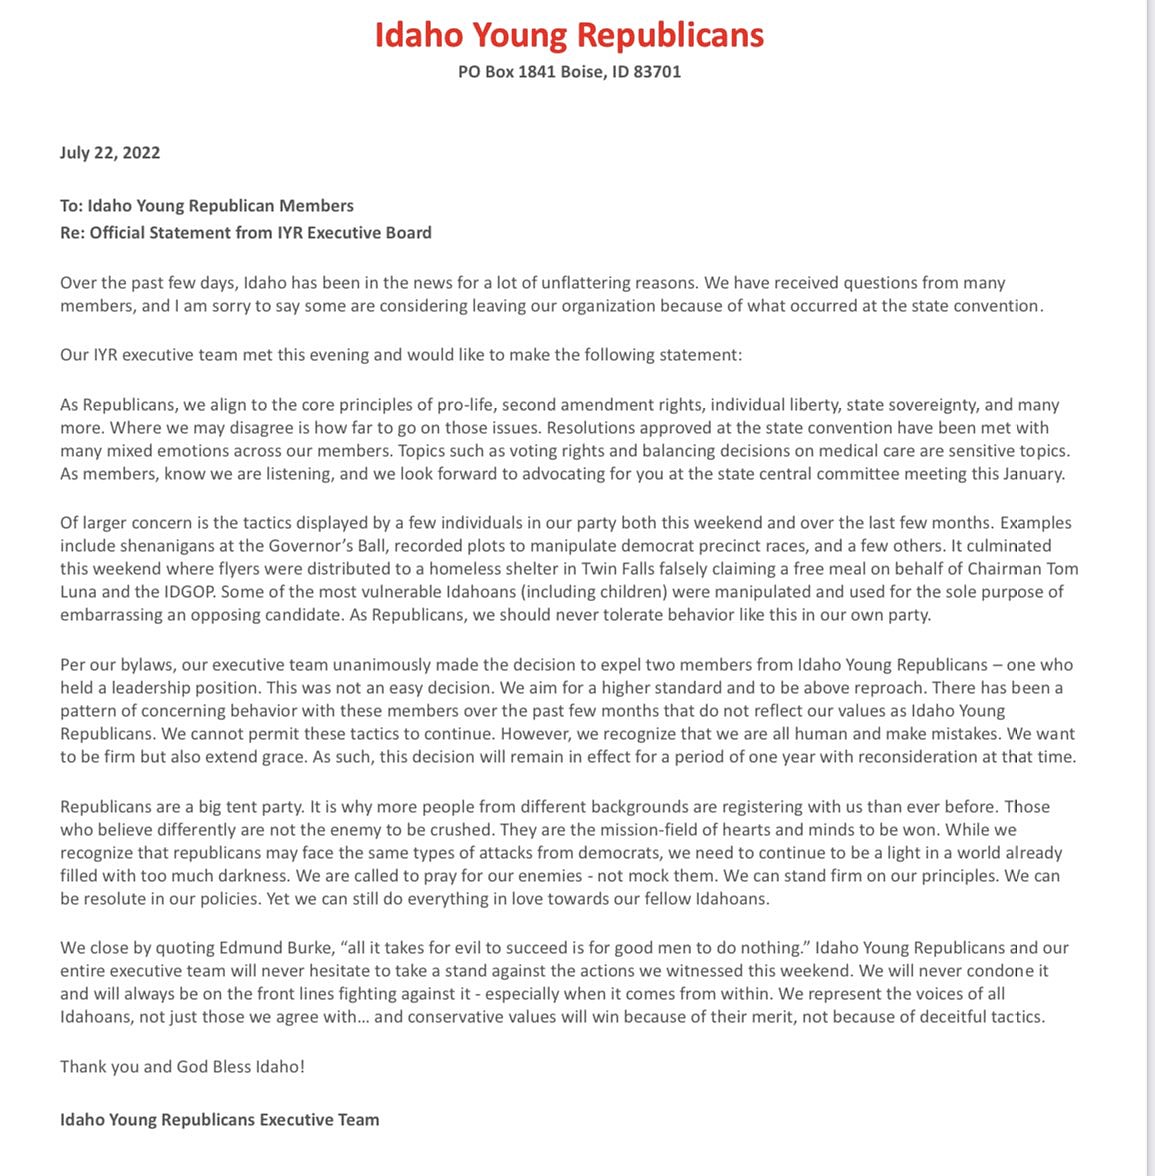 Official statement from the Idaho Young Republicans Executive Board
July 22, 2022